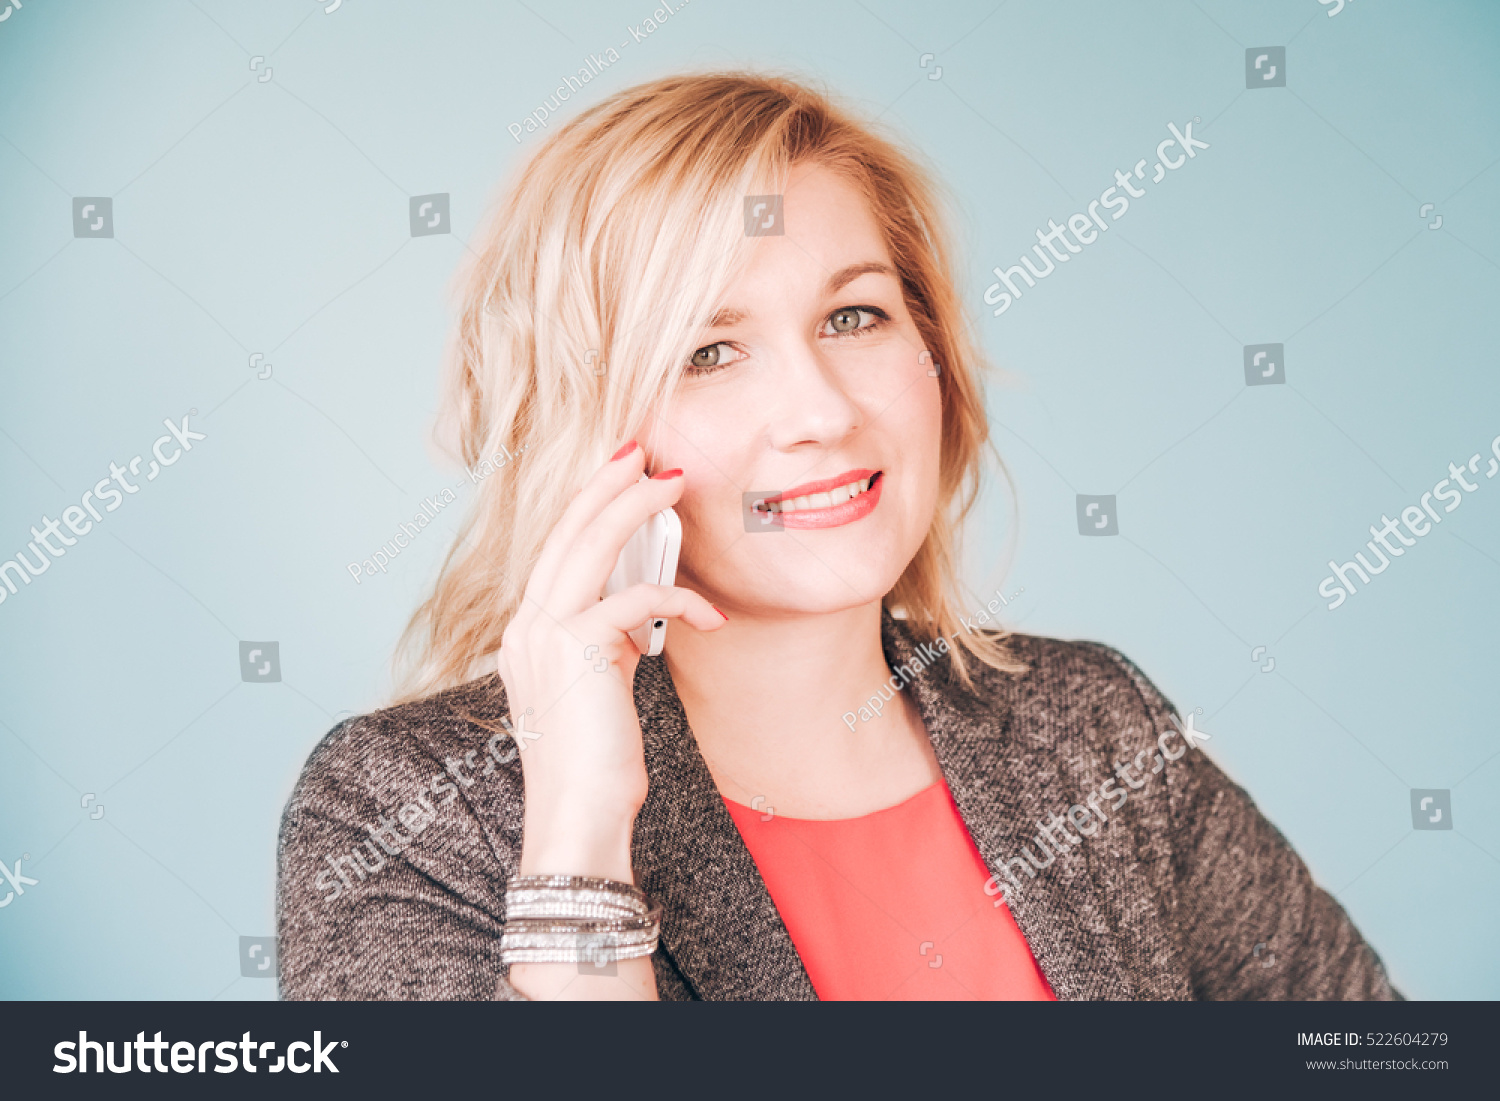 Pretty happy smiling woman in red blouse and business costume jacket communicating over white smartphone against pale teal blue background #522604279